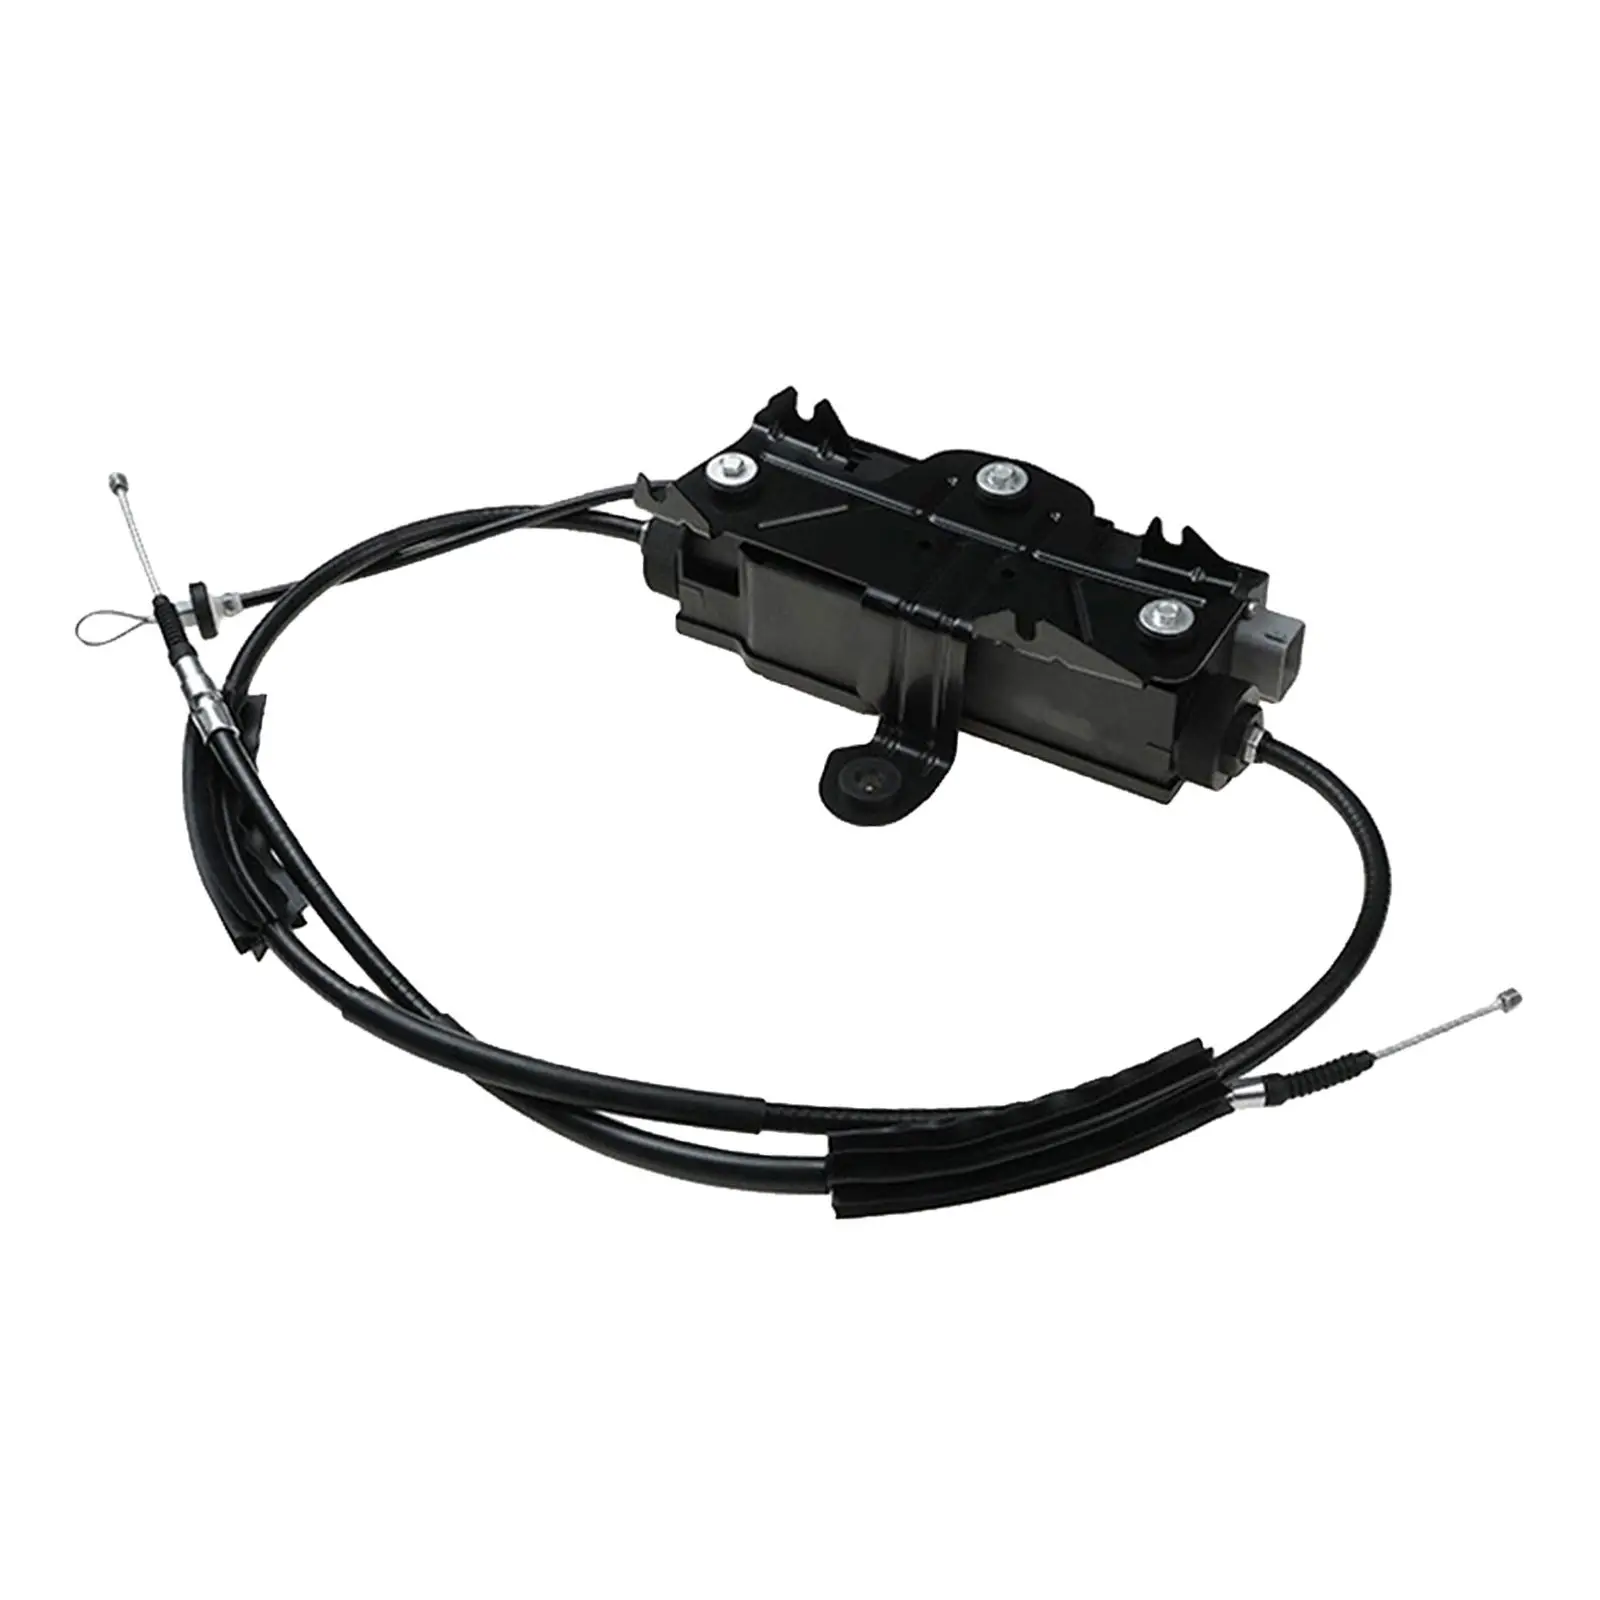 Park Brake Module, Parking Brake Actuator With Control Unit Fit for BMW 7 Series F01 F02 F03 34436877316